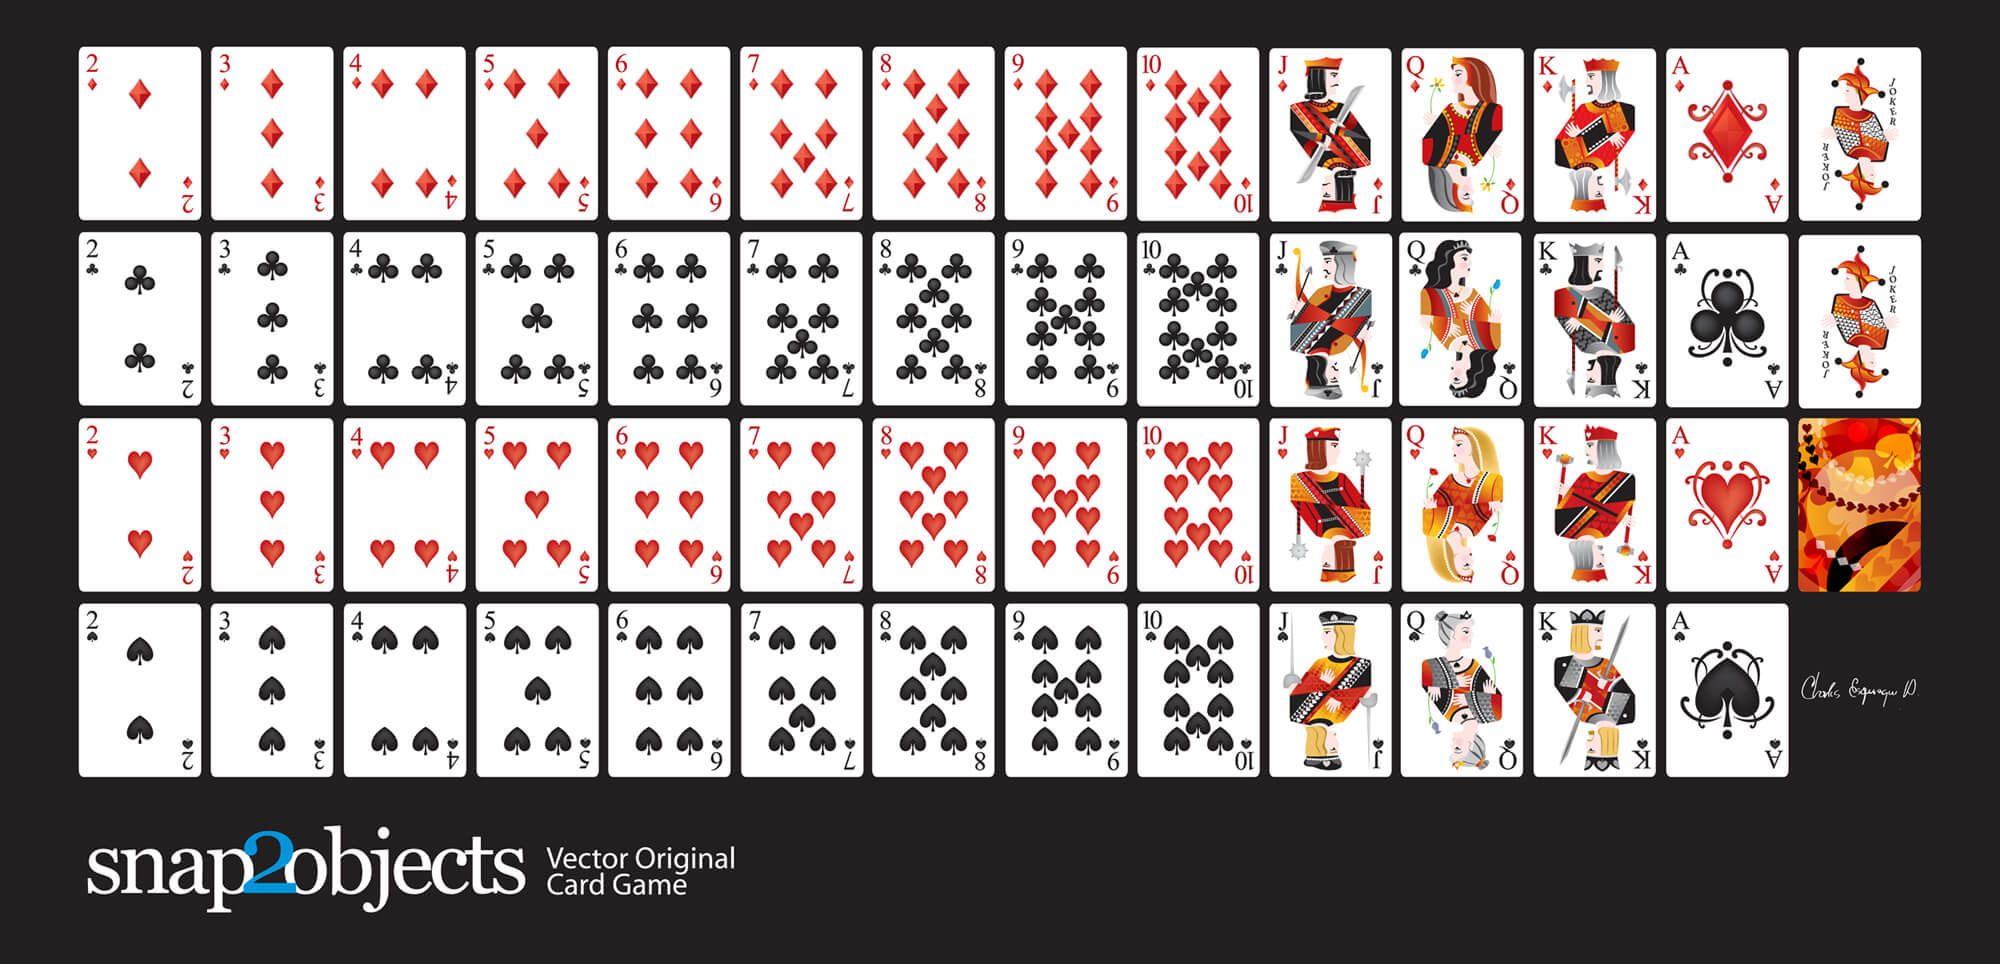 Playing Card Vector Art At Getdrawings | Free For Regarding Playing Card Design Template